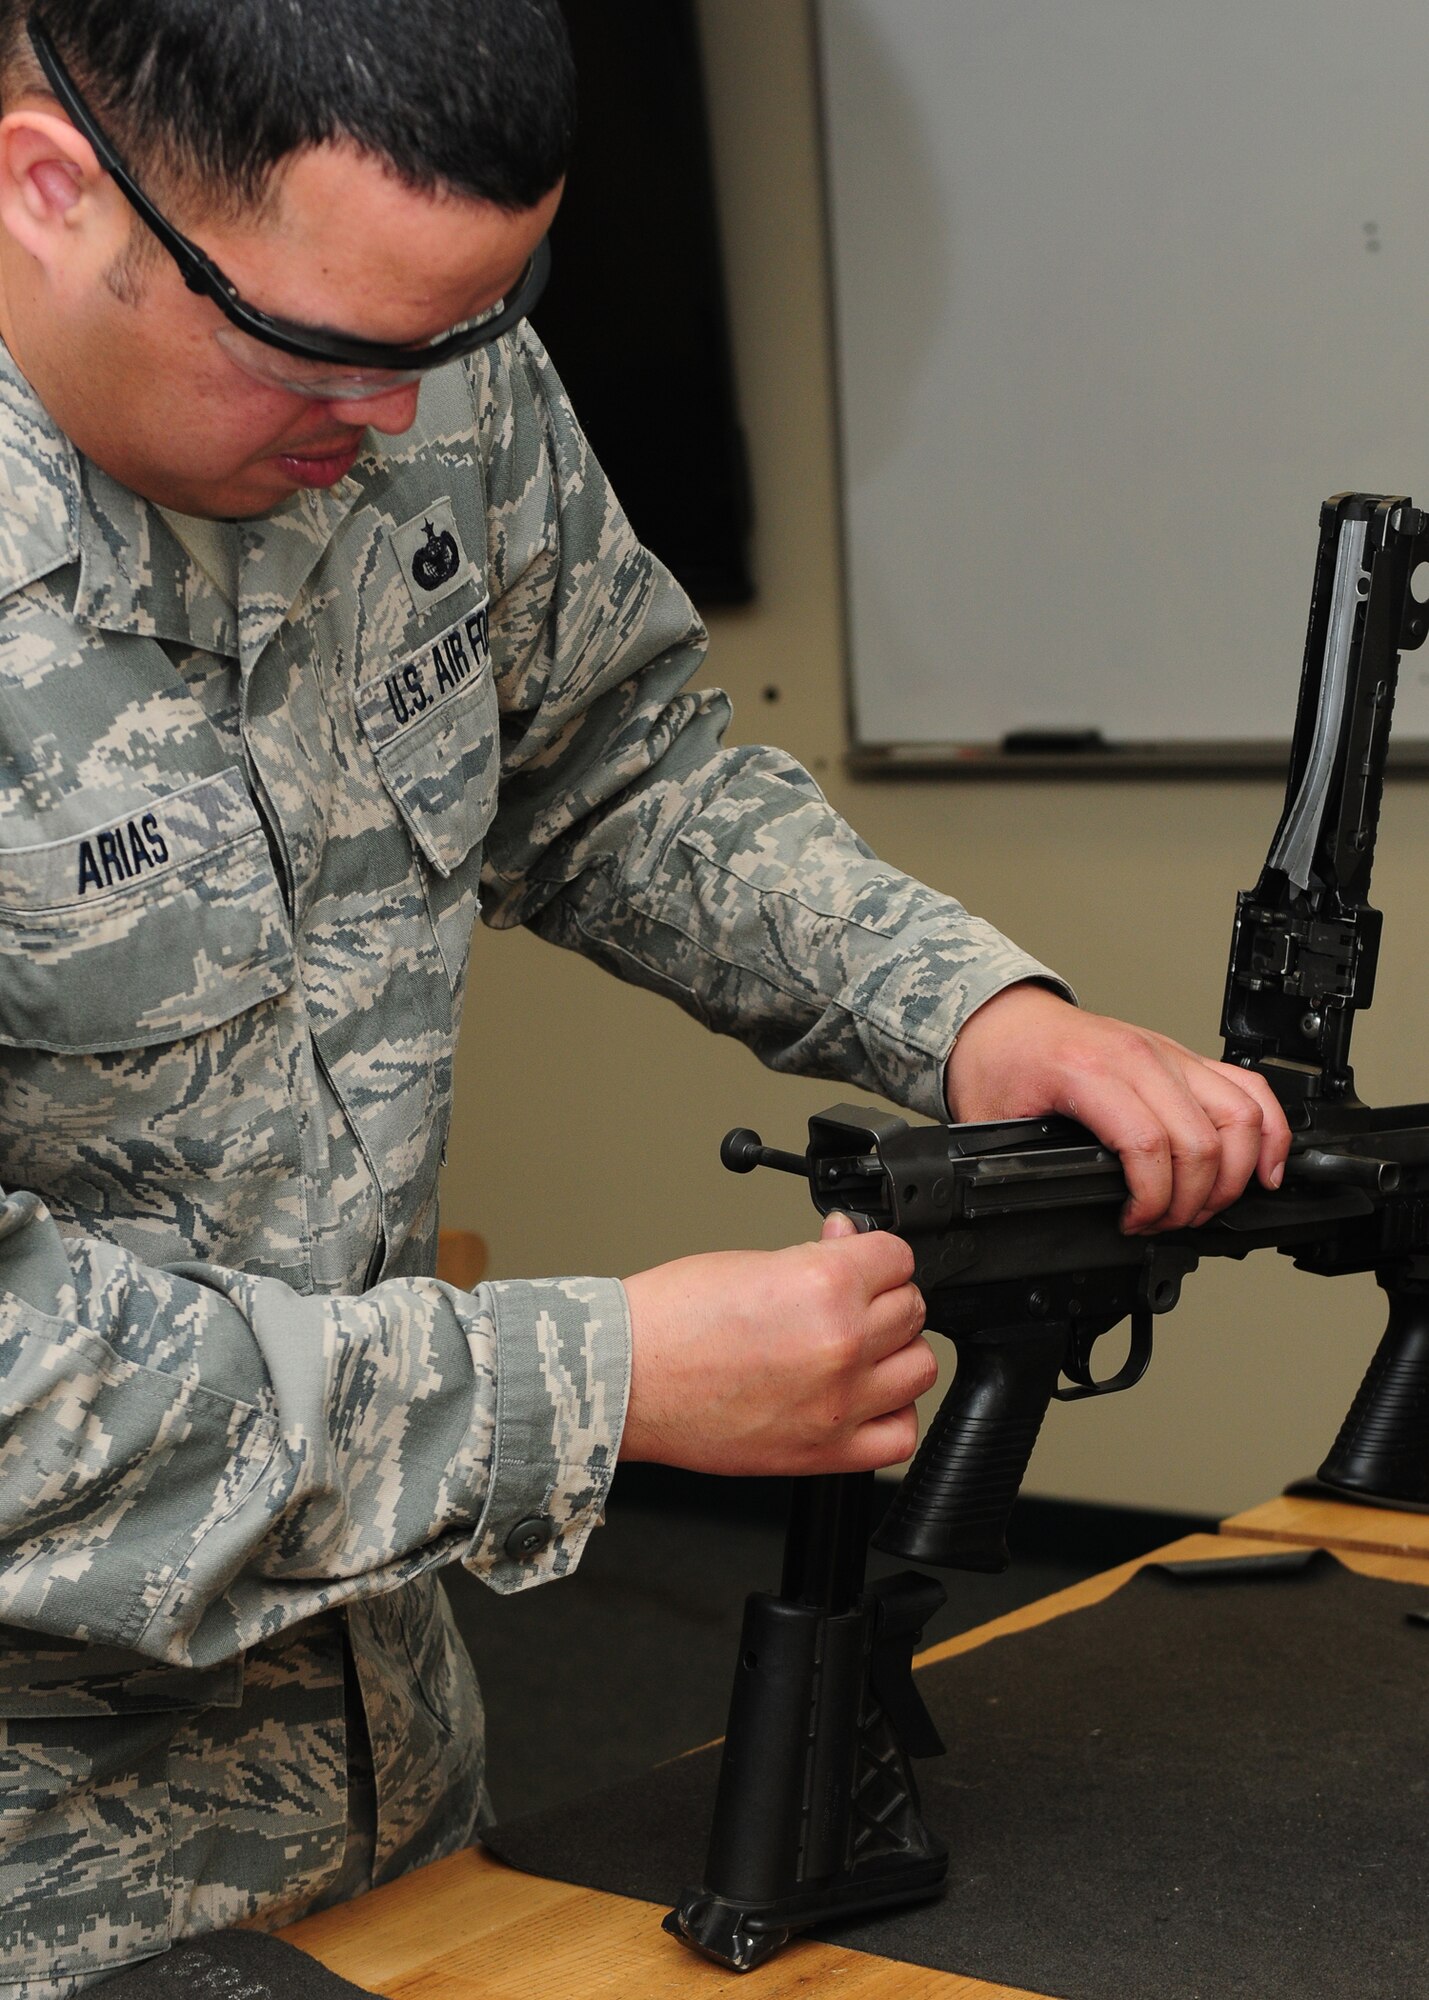 Tech. Sgt. Jesus Arias, 9th Security Forces Squadron NCO in charge of combat arms, breaks down and inspects a M-249 light machine gun at the combat arms facility on Beale Air Force Base, Calif., Jan. 10, 2013. The combat arms instructors are in charge of training and qualifying Team Beale on firing weapons. (U.S. Air Force photo by Senior Airman Allen Pollard/Released)